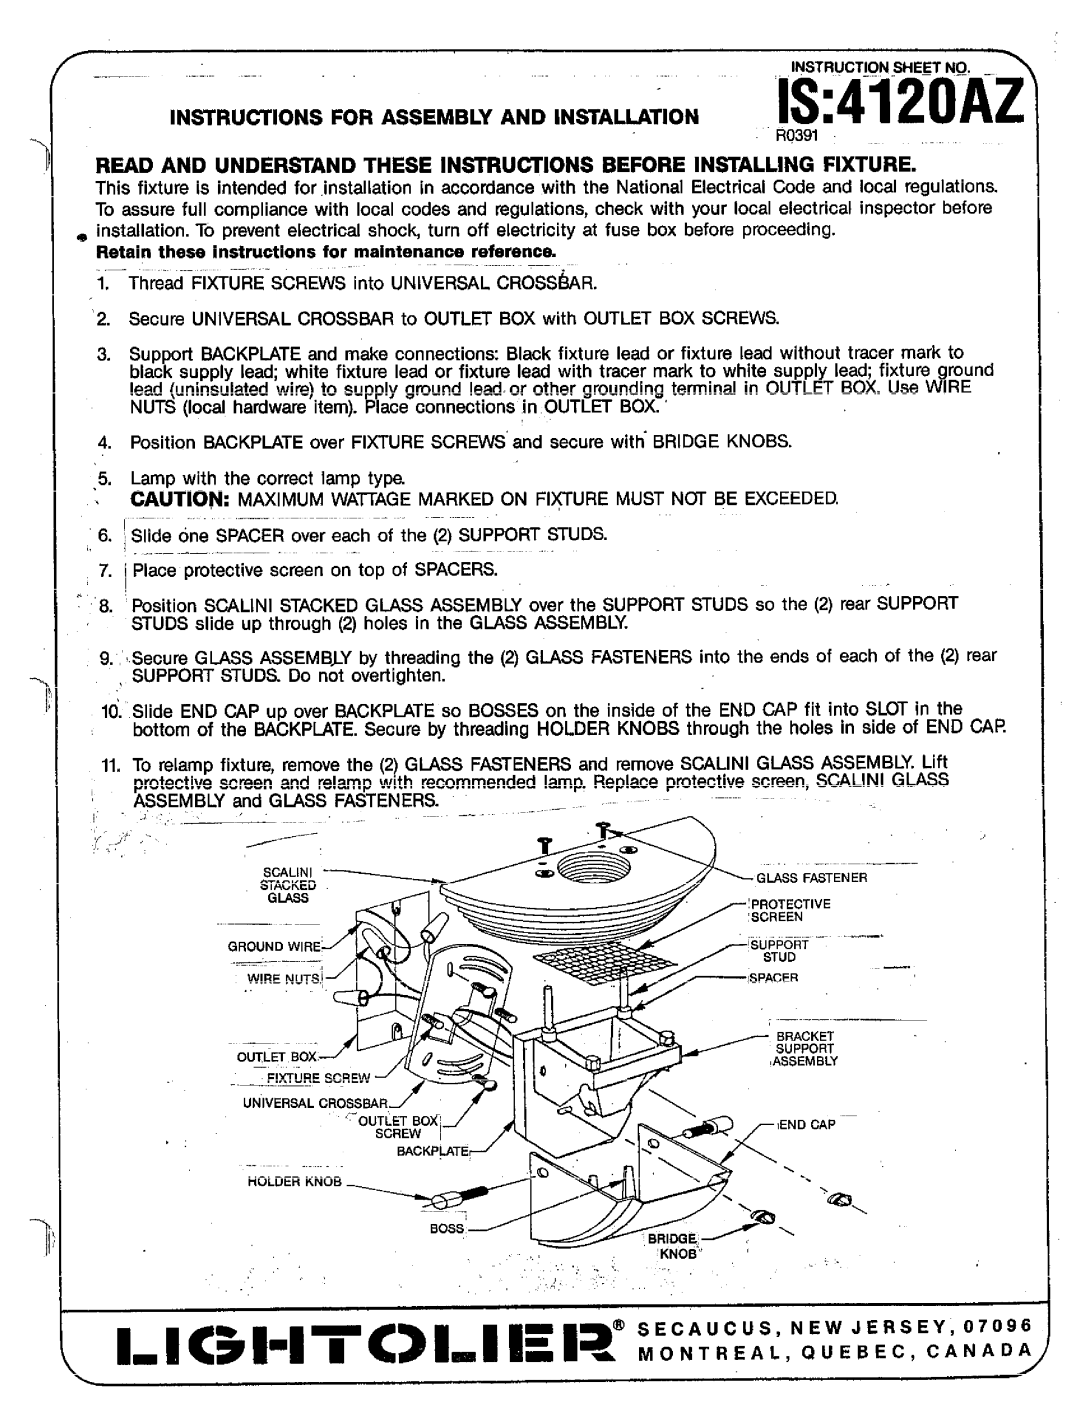 Lightolier IS:4120AZ instruction sheet Assembly, and GLASS FASTENERS 